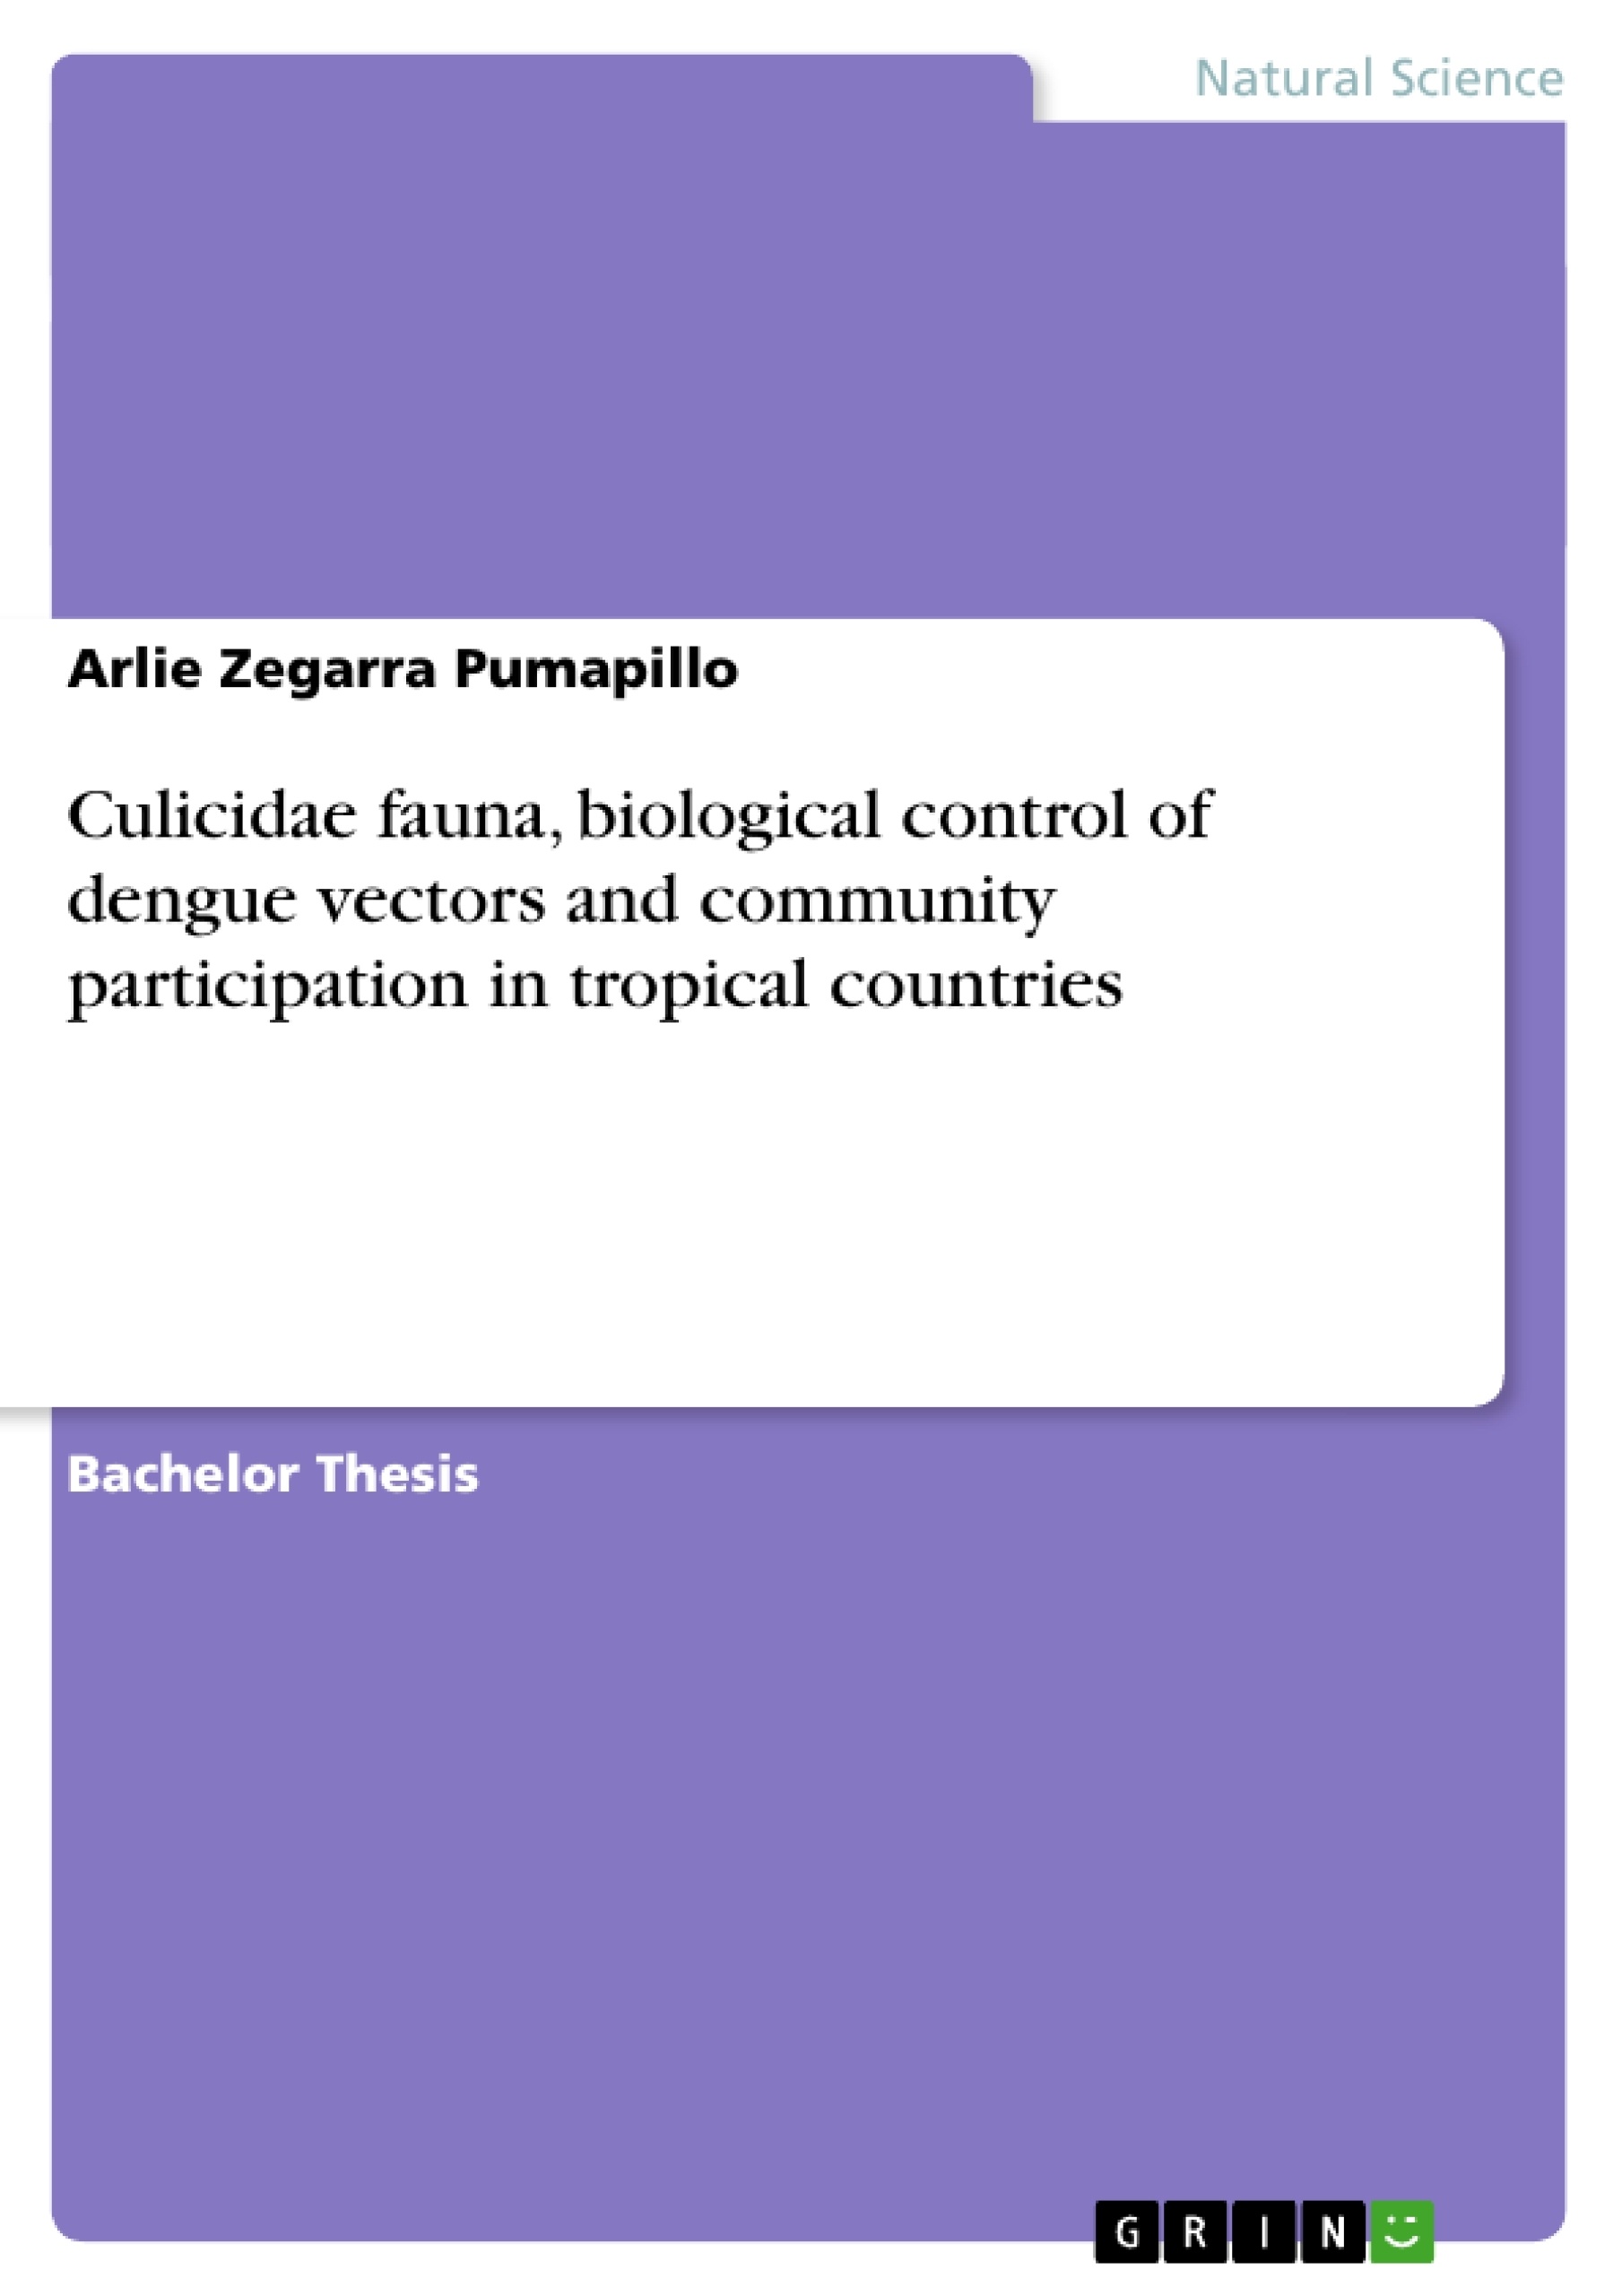 Title: Culicidae fauna, biological control of dengue vectors and community participation in tropical countries